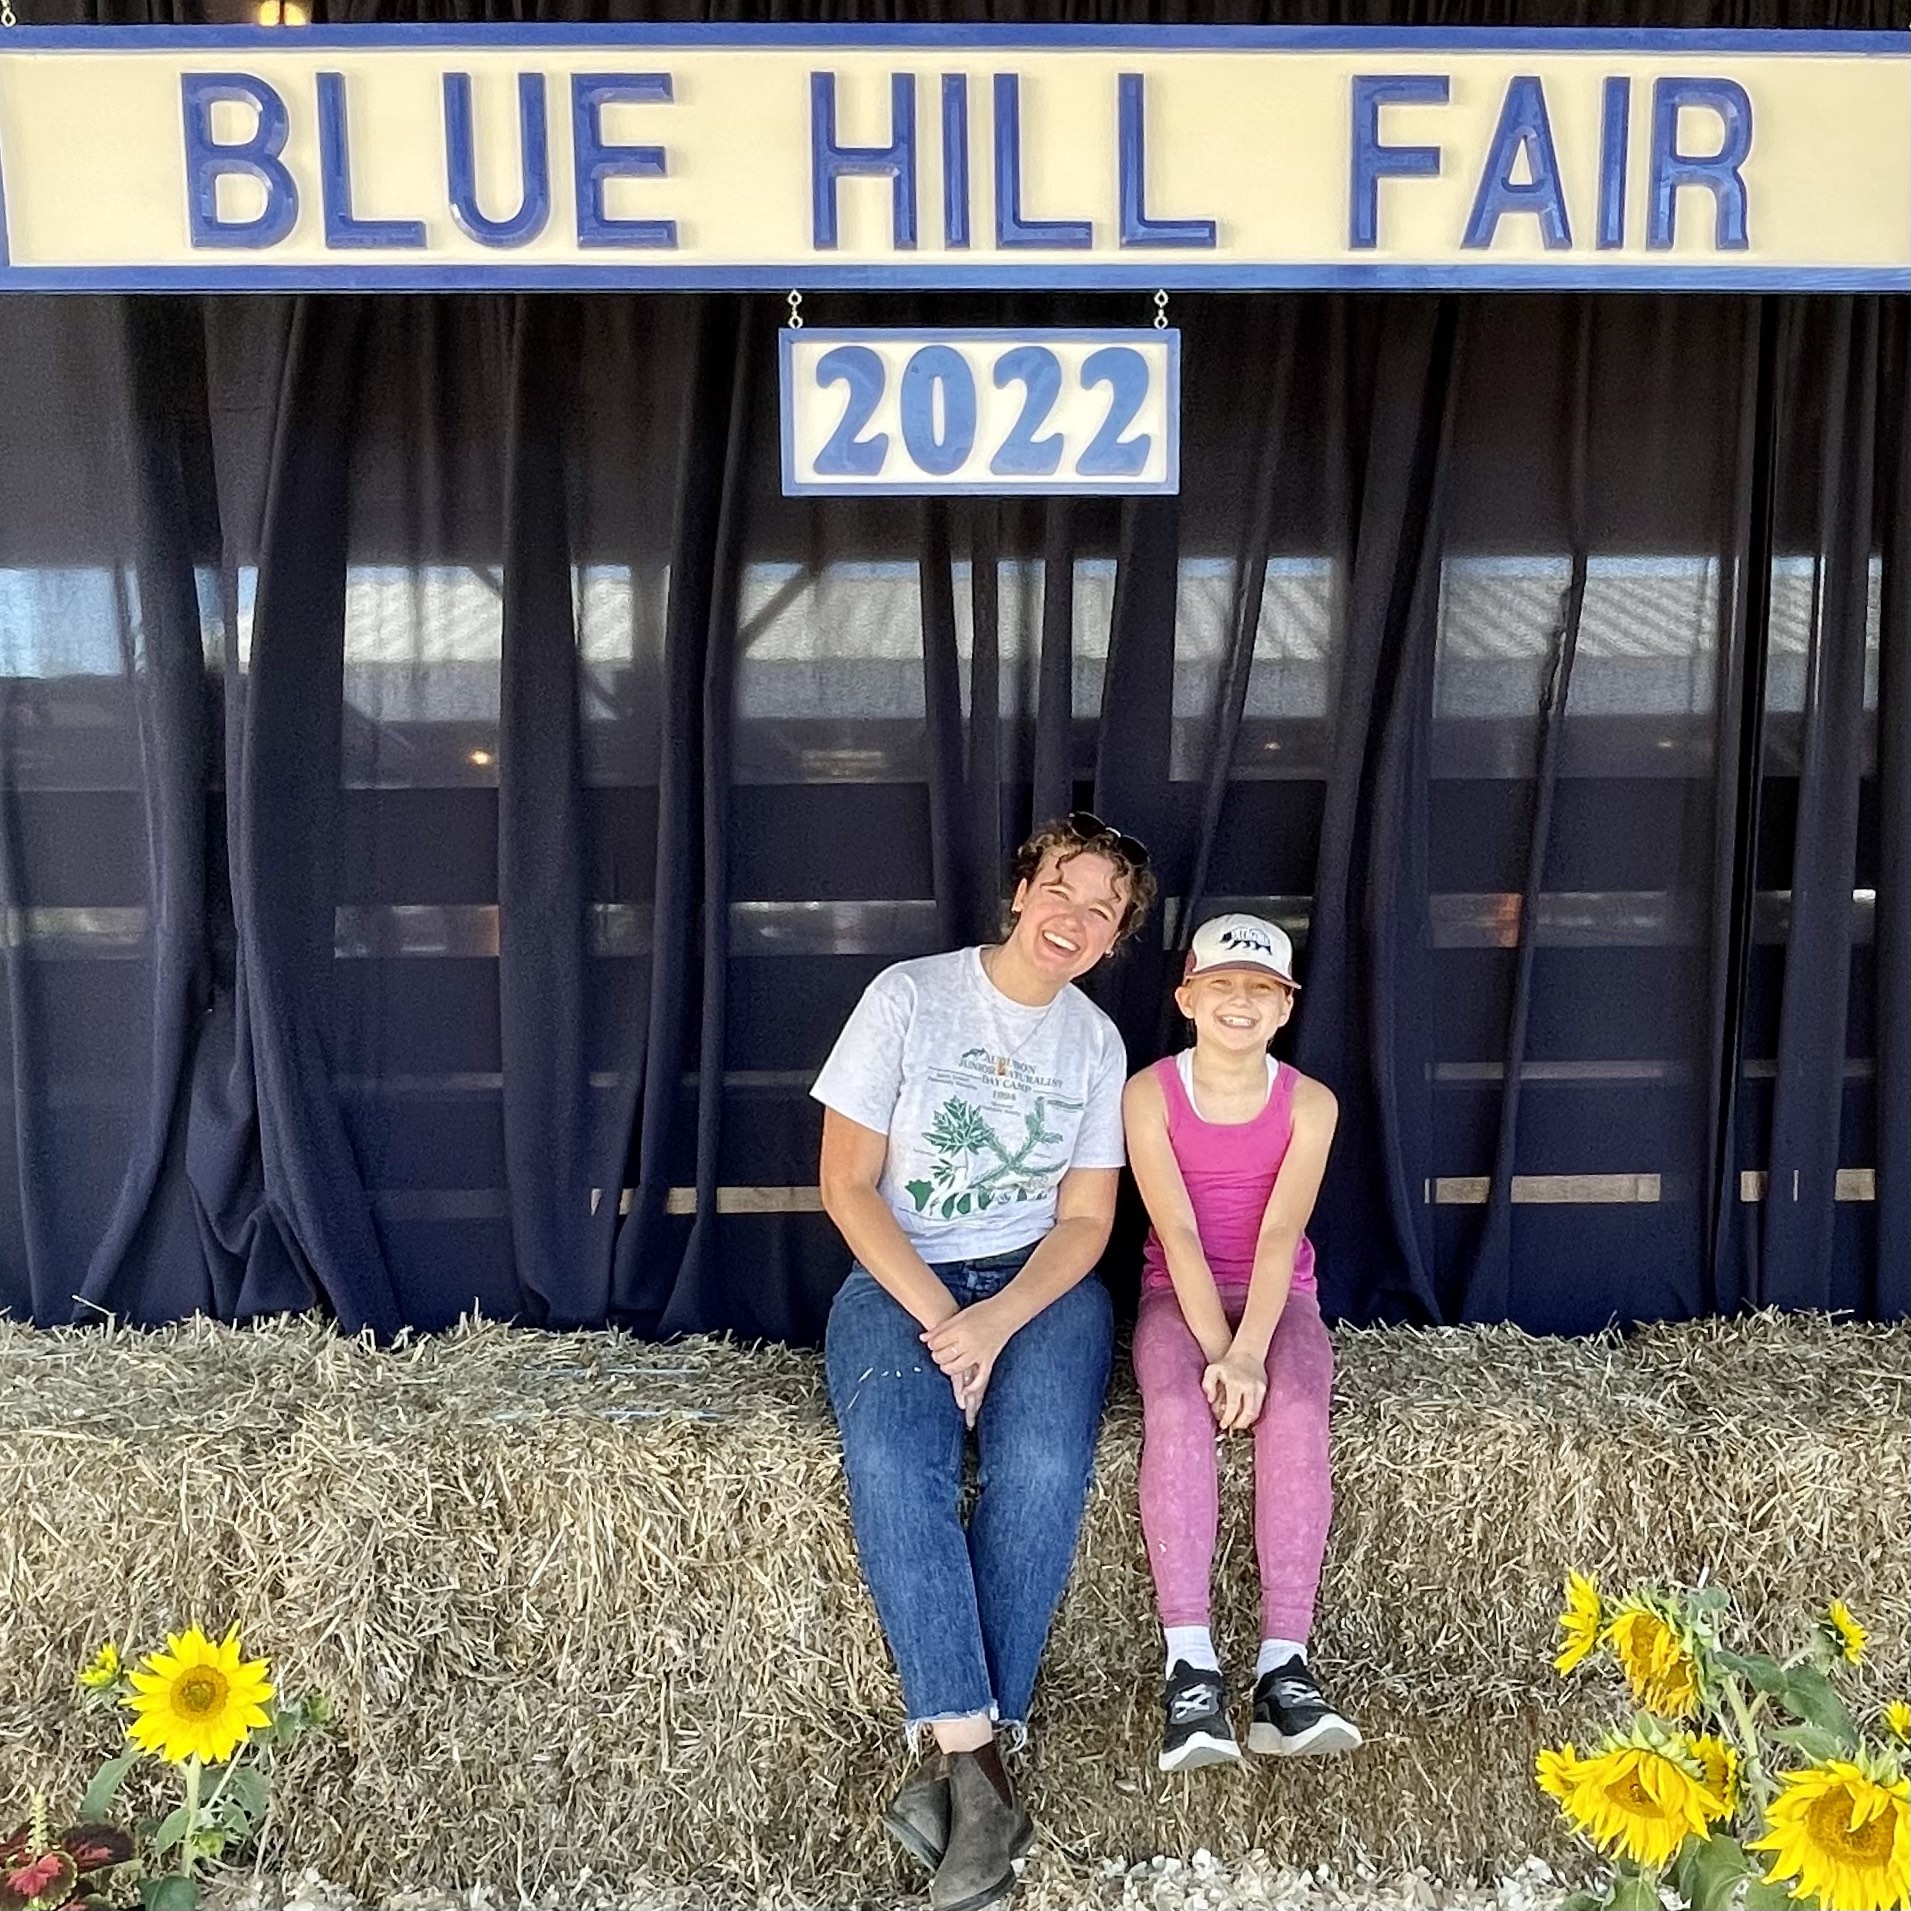 4-H Worker and Student sitting on hay bales under blue hill fair signage